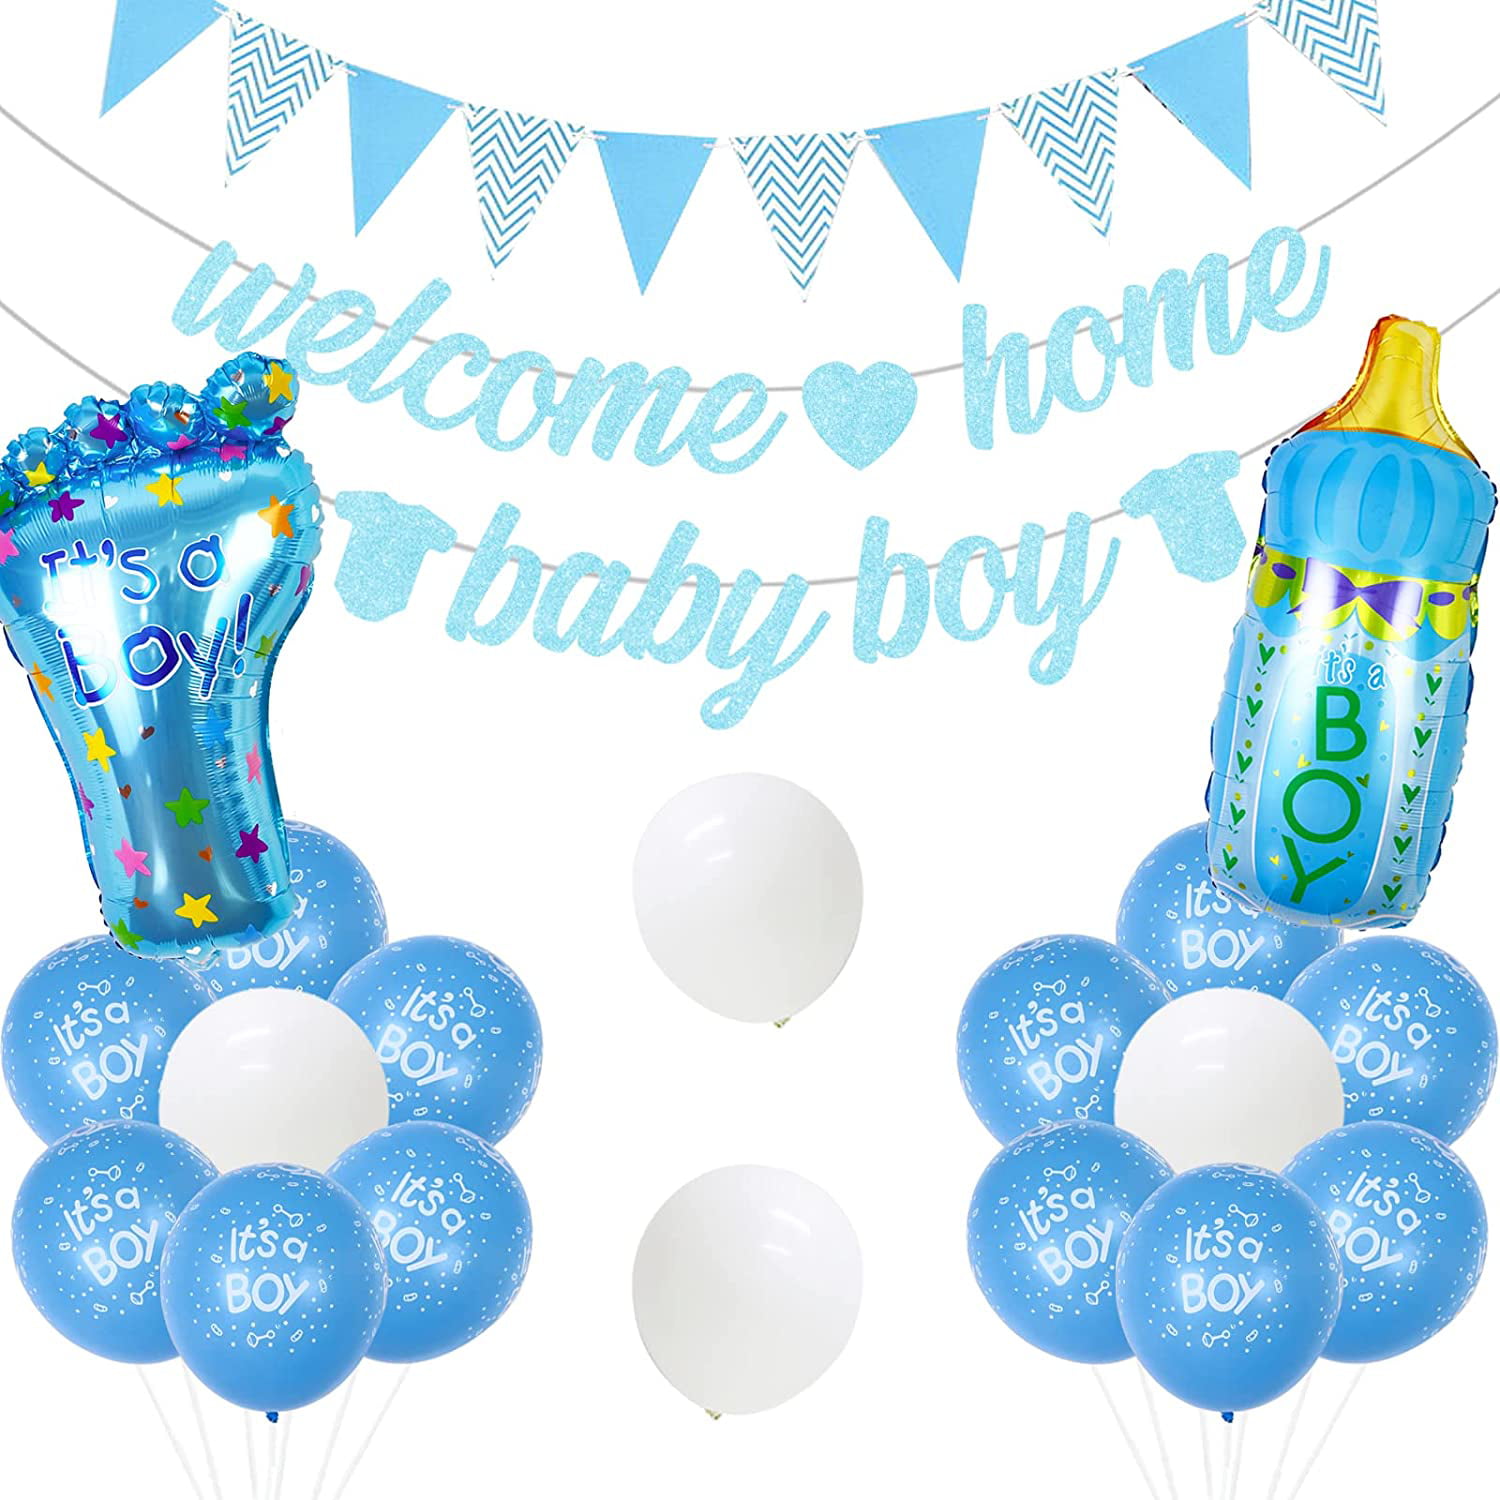 Welcome Home Baby Decorations Boy, Blue Gender Decoration with Glitter Banner/Baby Bottle, Foot-shaped Foil Balloons, for Newborn Baby Boy Welcome Party, Christening Party - Walmart.com